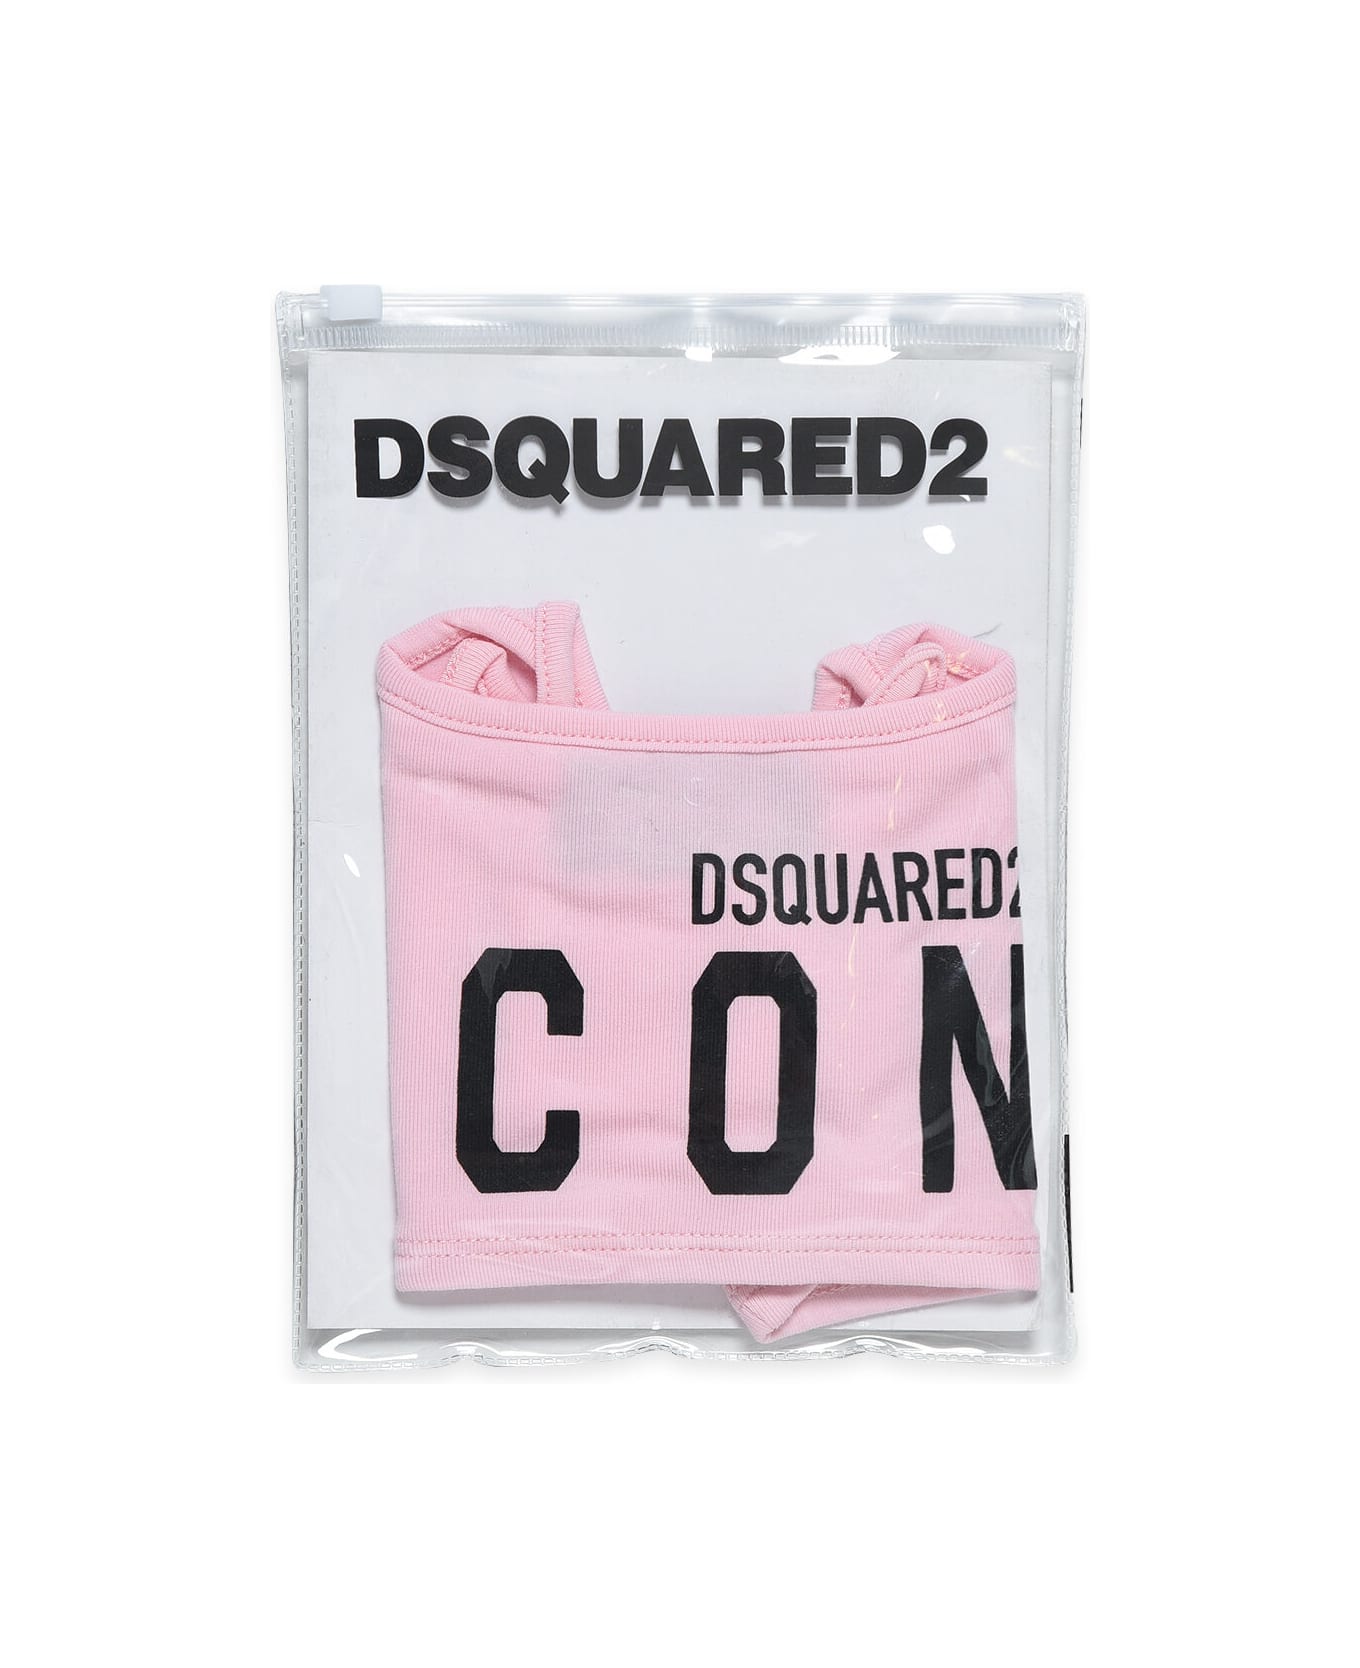 Dsquared2 D2ub3f-icon Und Bra Dsquared - Orchid pink